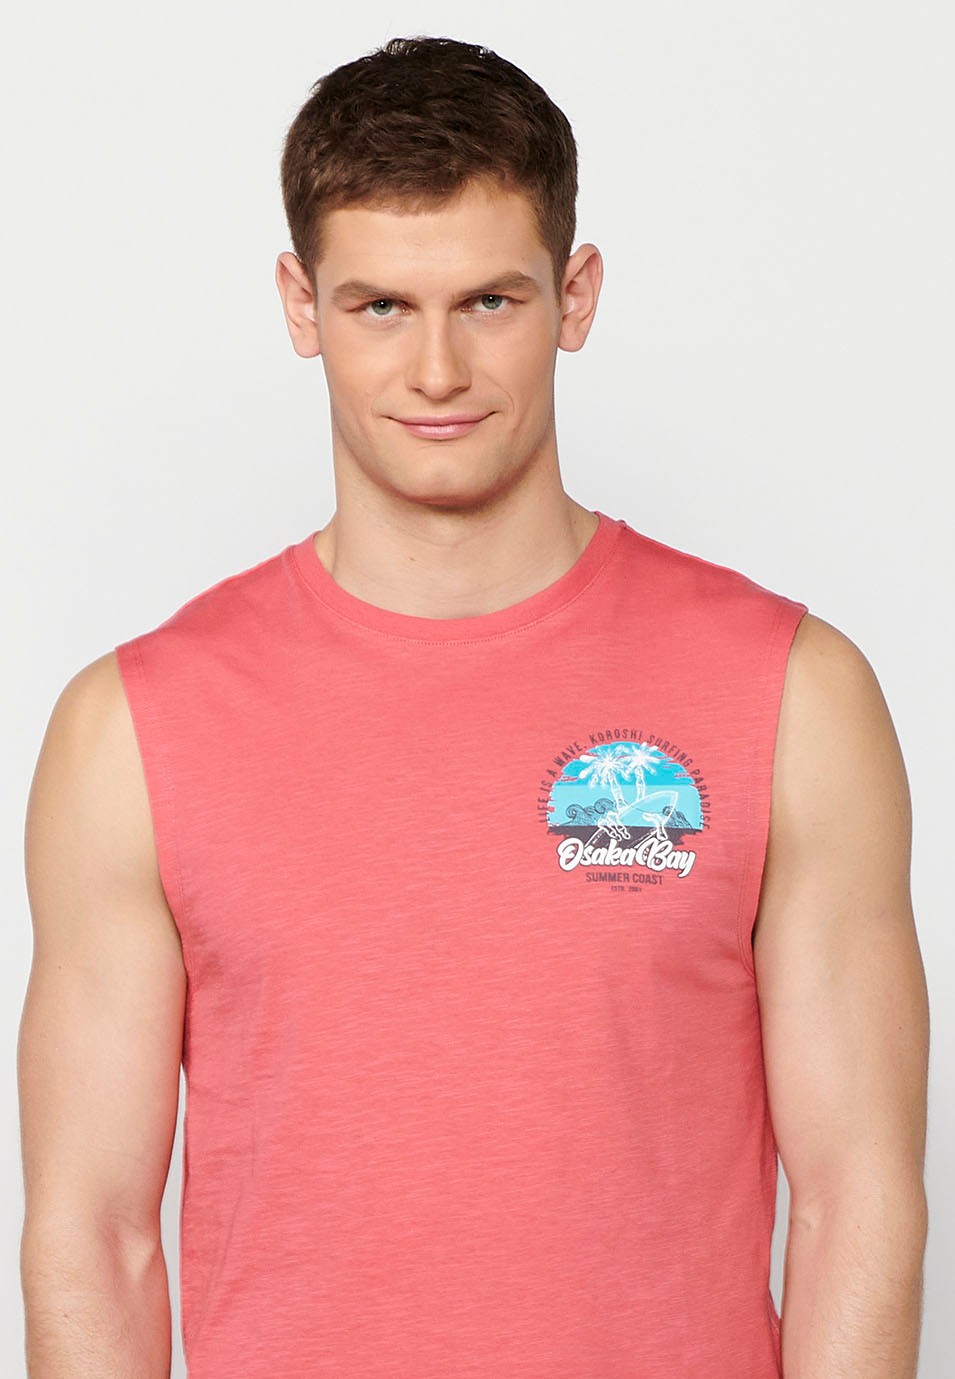 Coral printed sleeveless tank top for men